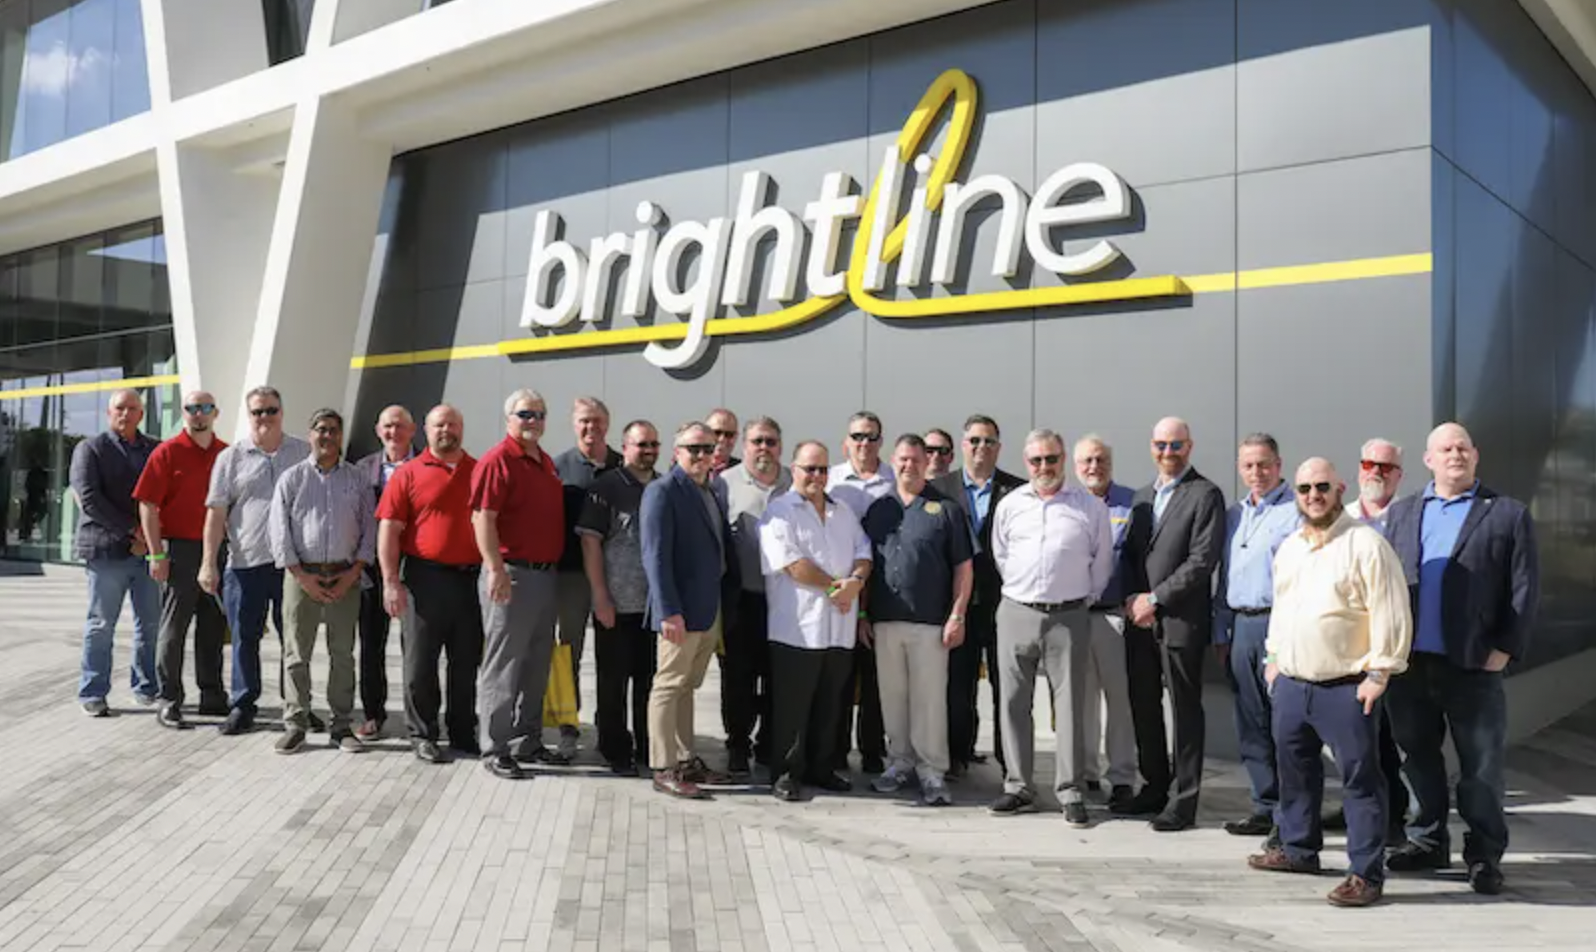 Brightline West has inked a commitment with the High-Speed Rail Labor Coalition, which comprises 13 rail unions representing more than 160,000 freight, regional, commuter and passenger railroad workers in the United States. (Photograph Courtesy of Brightline West)